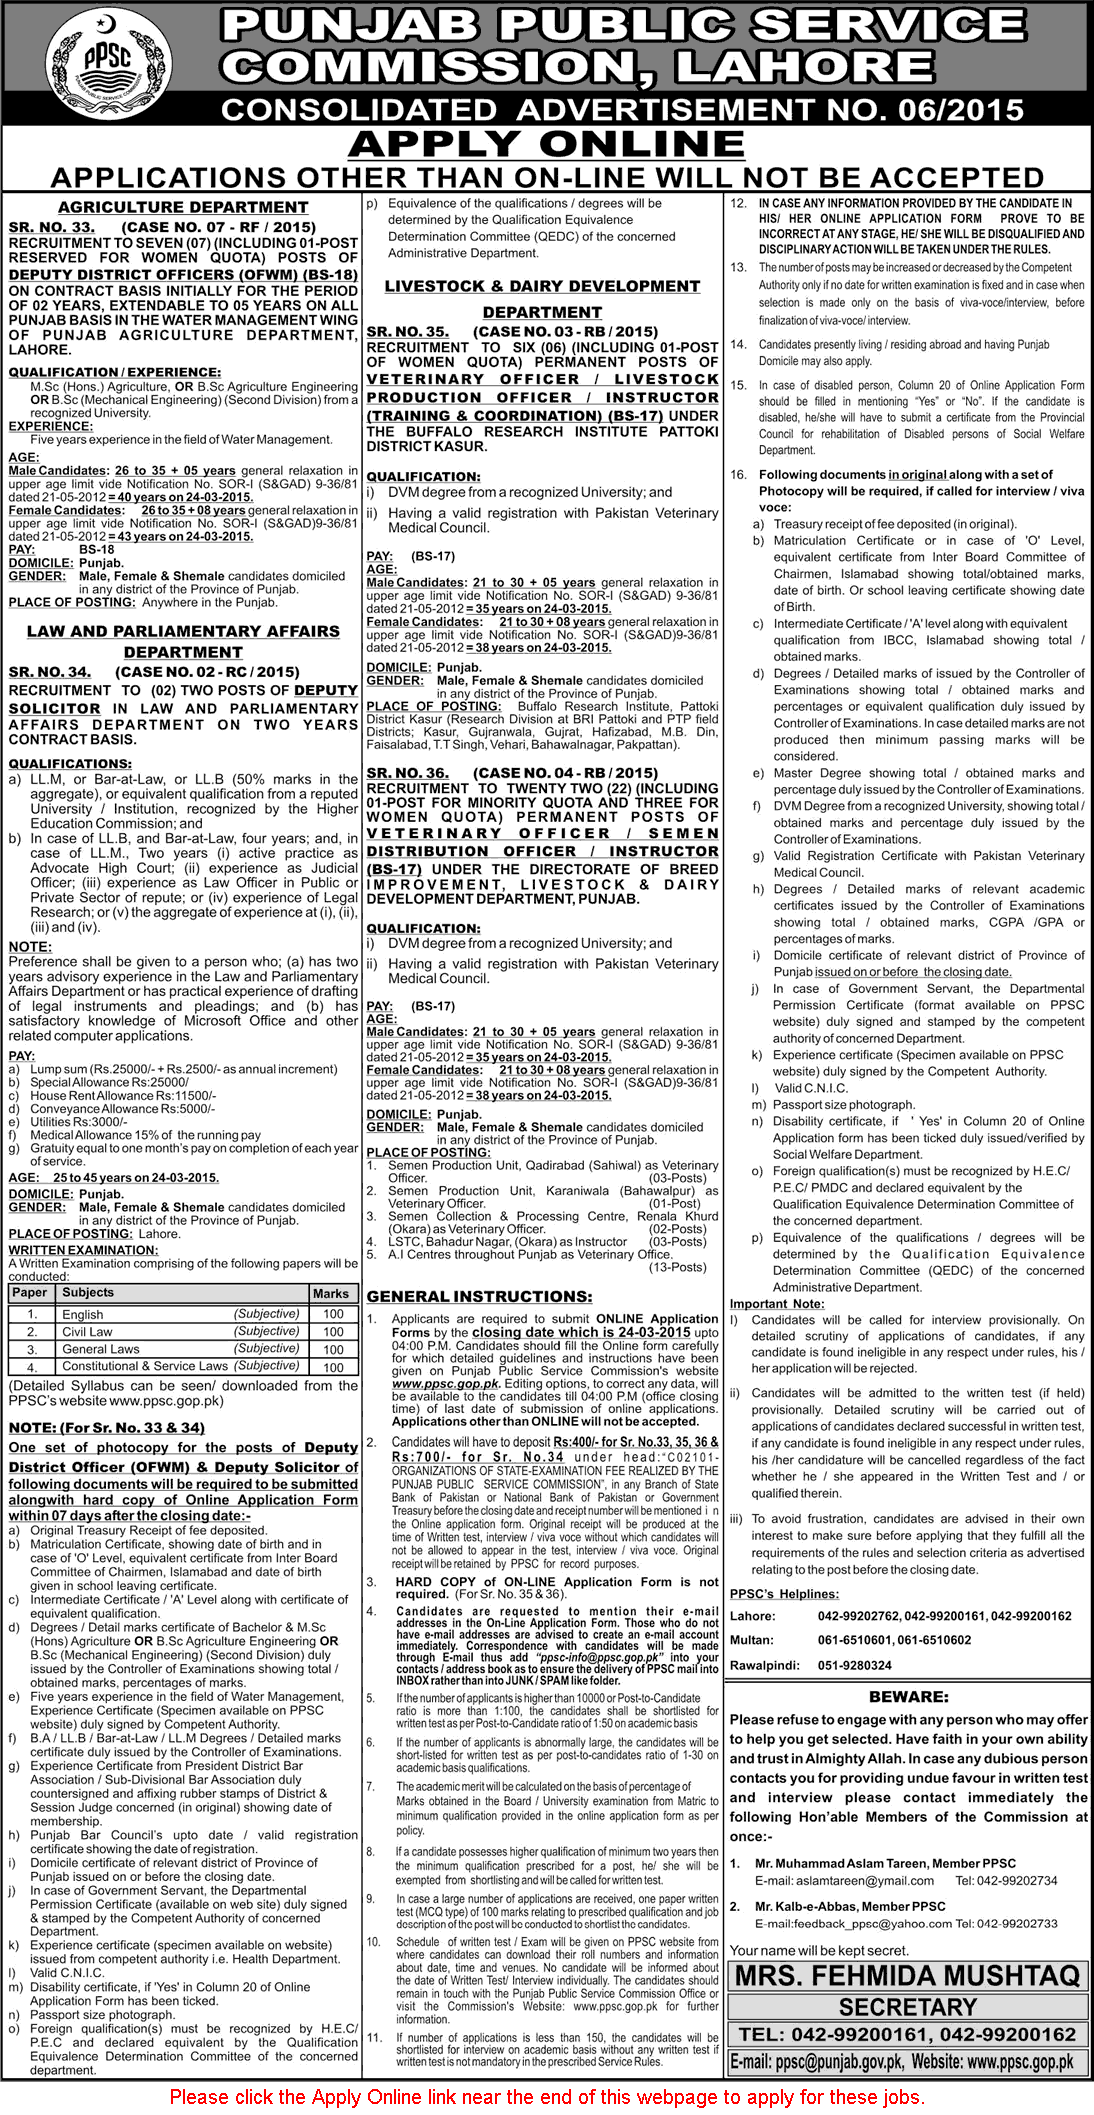 PPSC Jobs March 2015 Consolidated Advertisement No 06/2015 6/2015 Latest